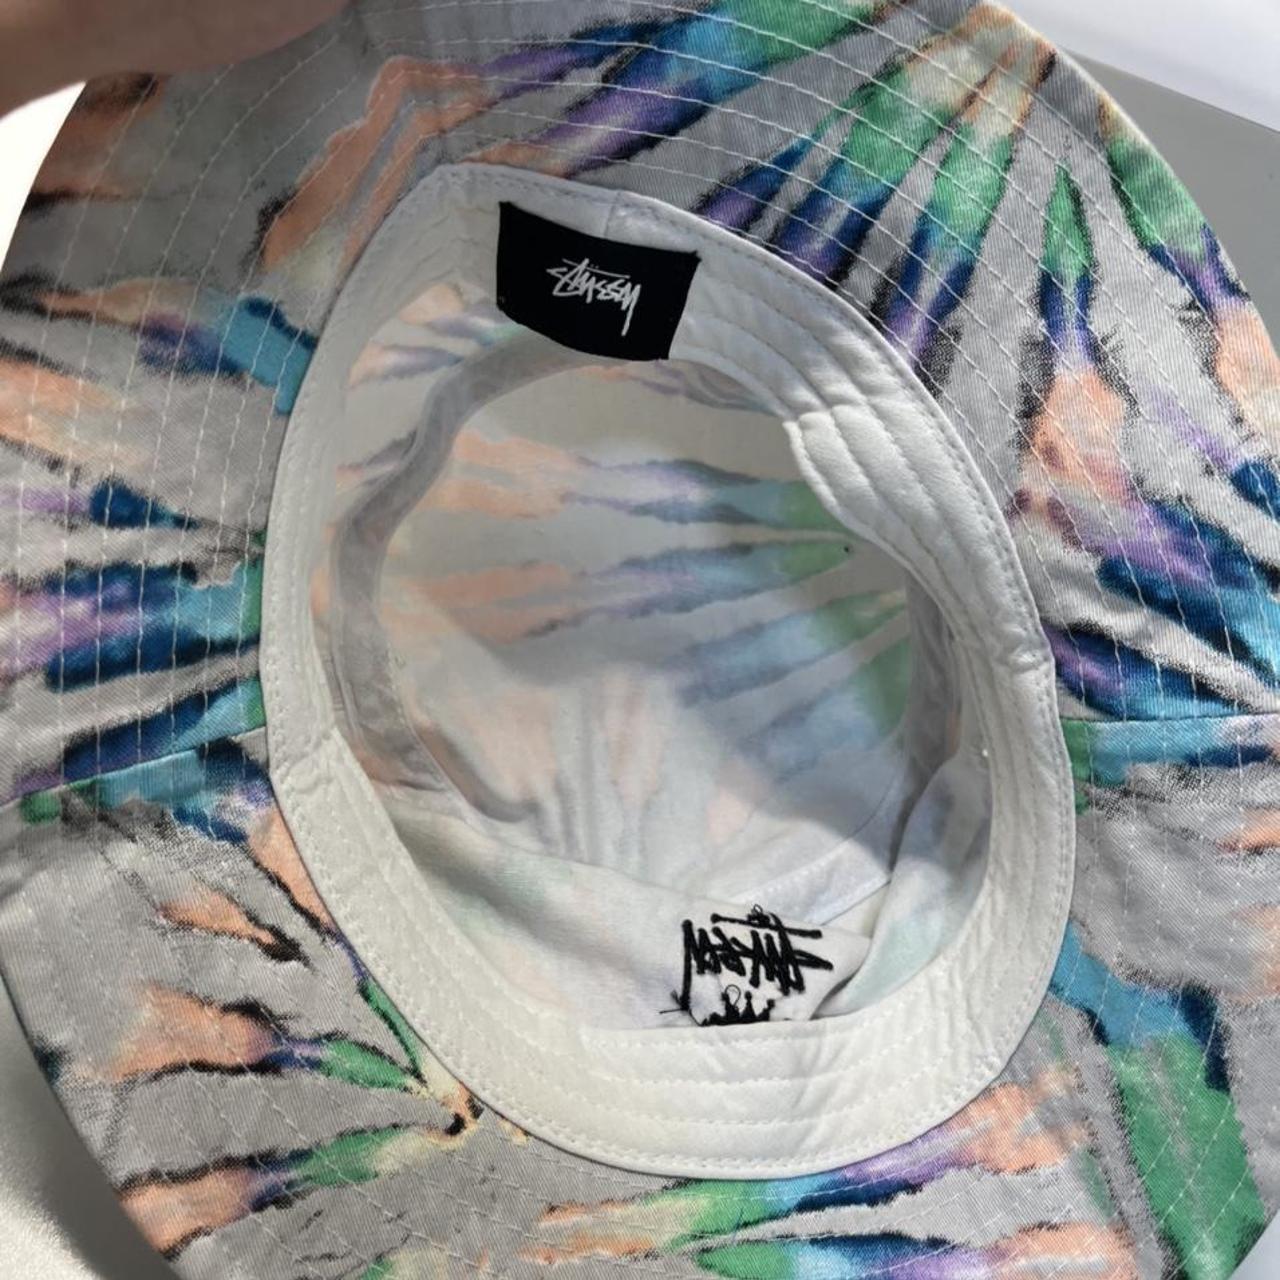 Product Image 3 - Stussy Bucket Hat in "Rainbow"
Condition: